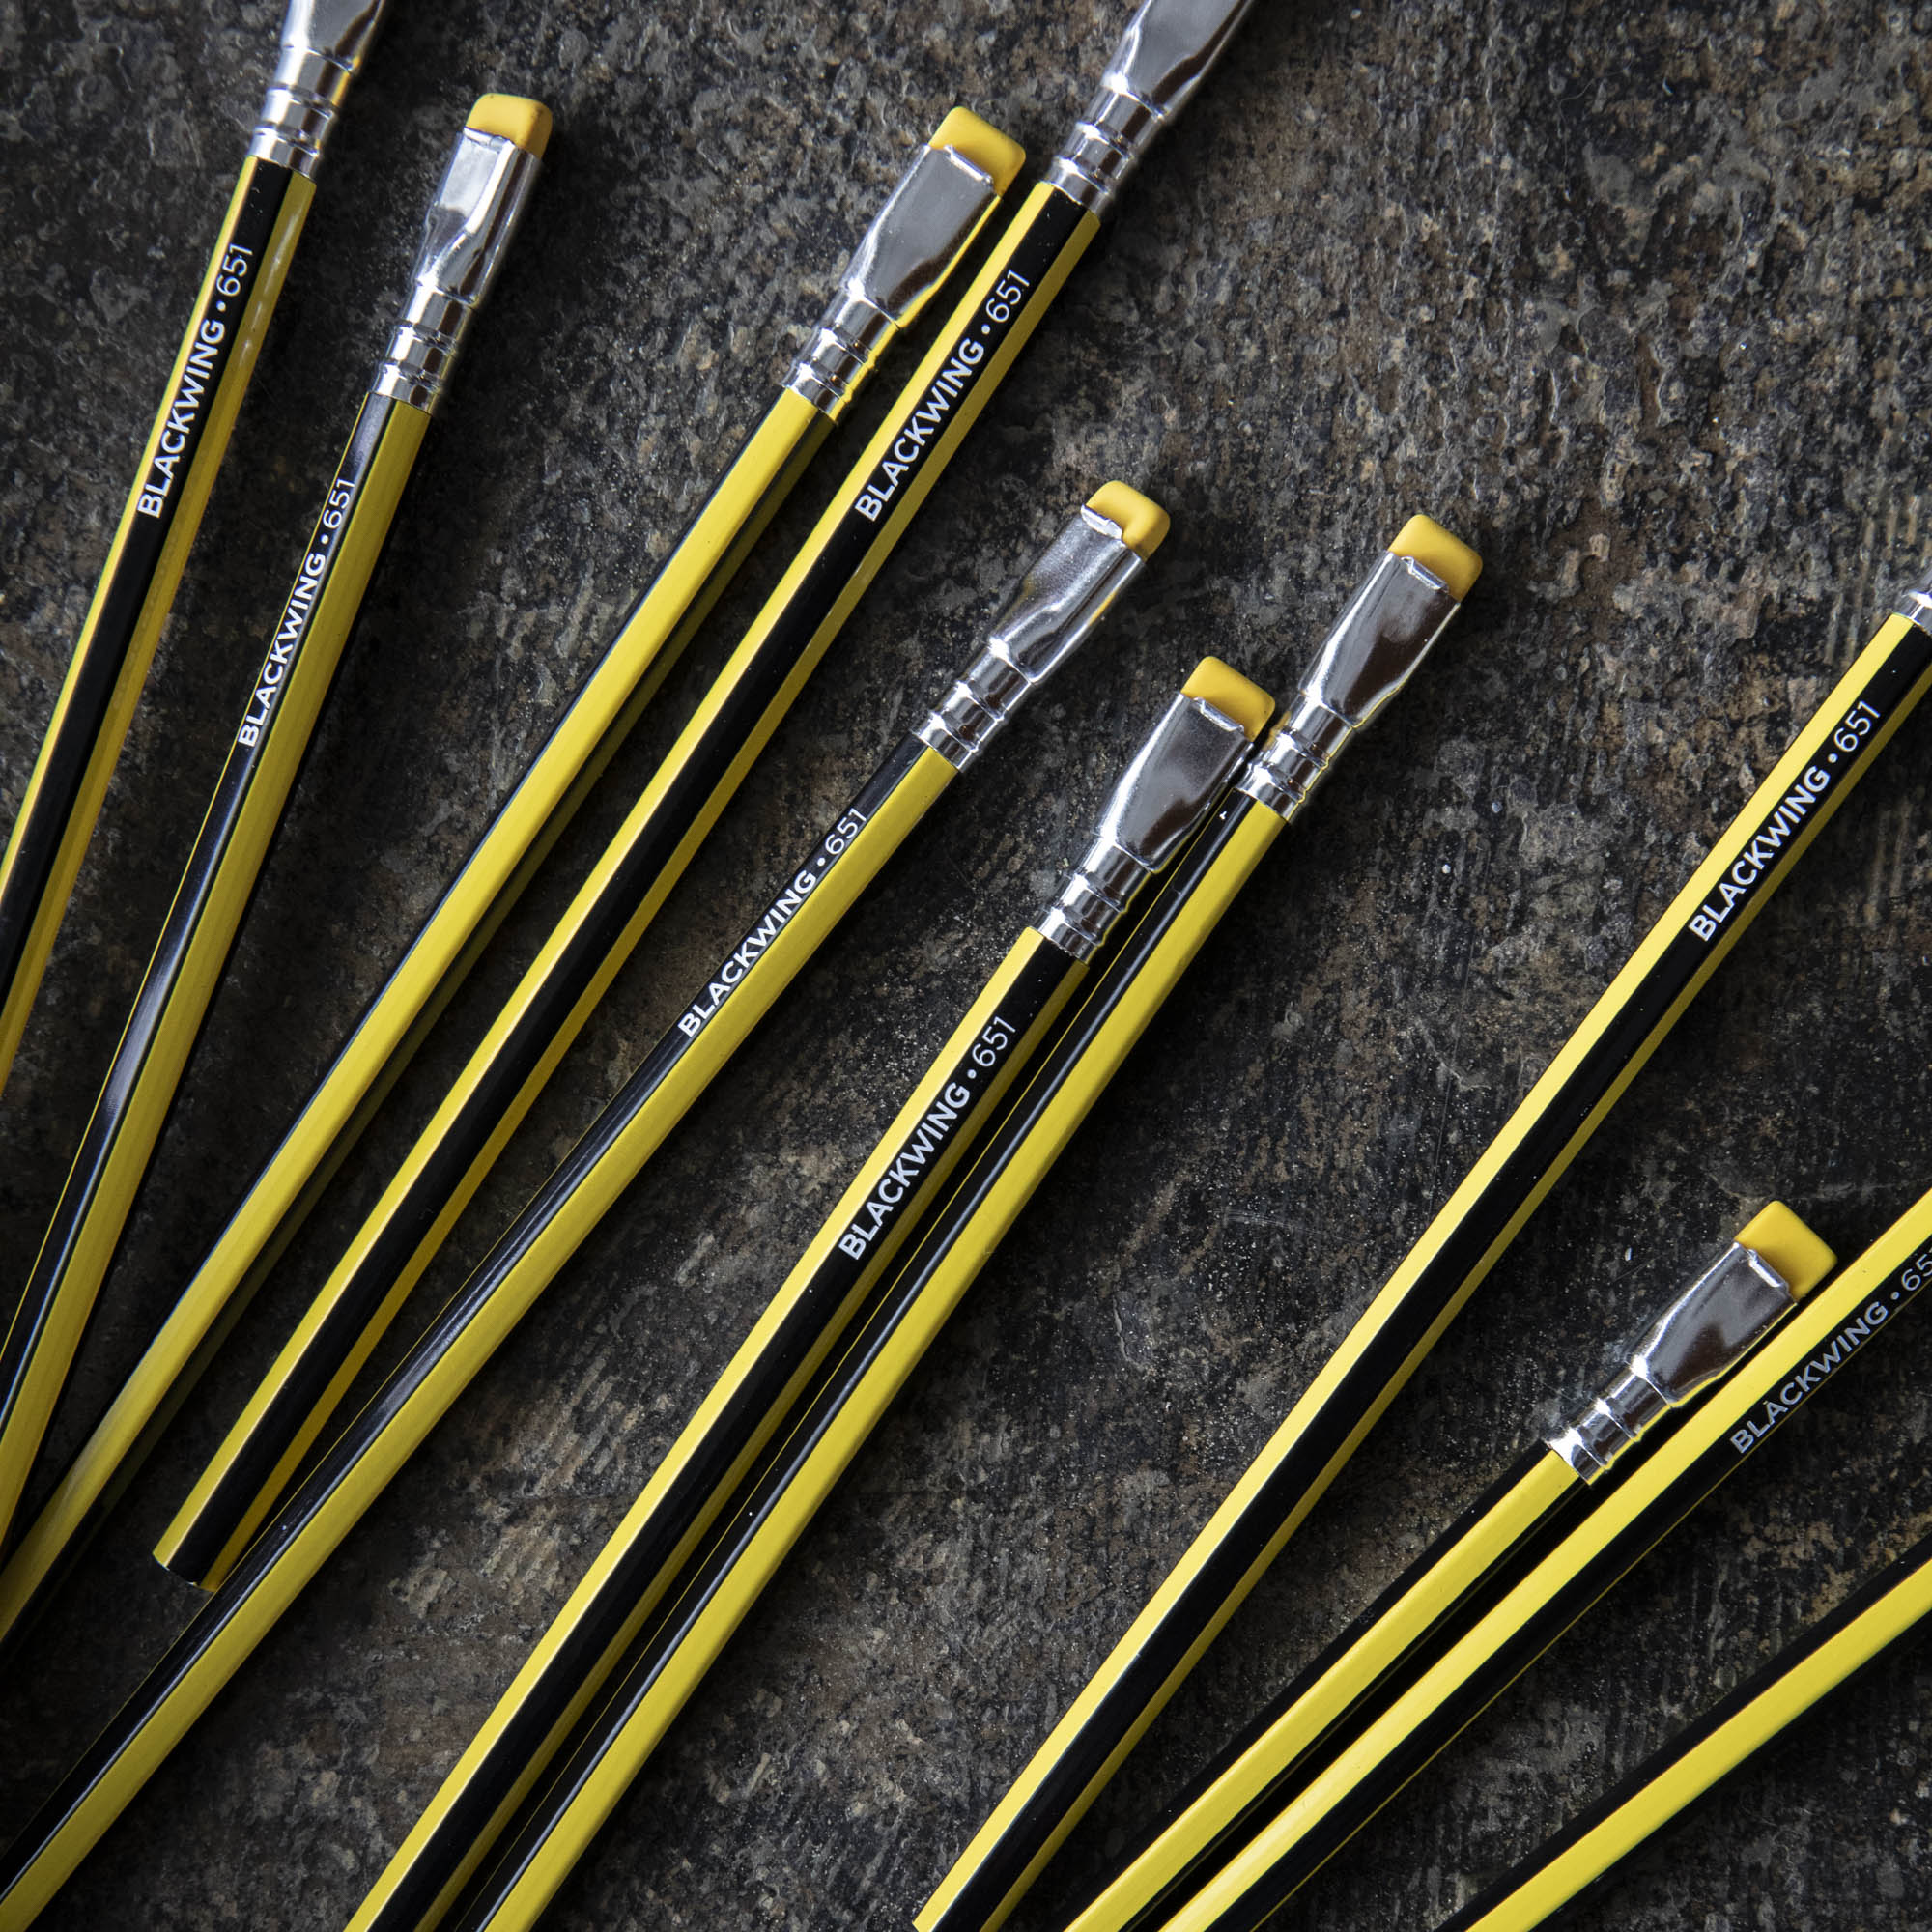 A collection of Blackwing Volume 651- Tribute to Bruce Lee pencils, one sharpened, arranged diagonally on a dark background, reminiscent of Bruce Lee&